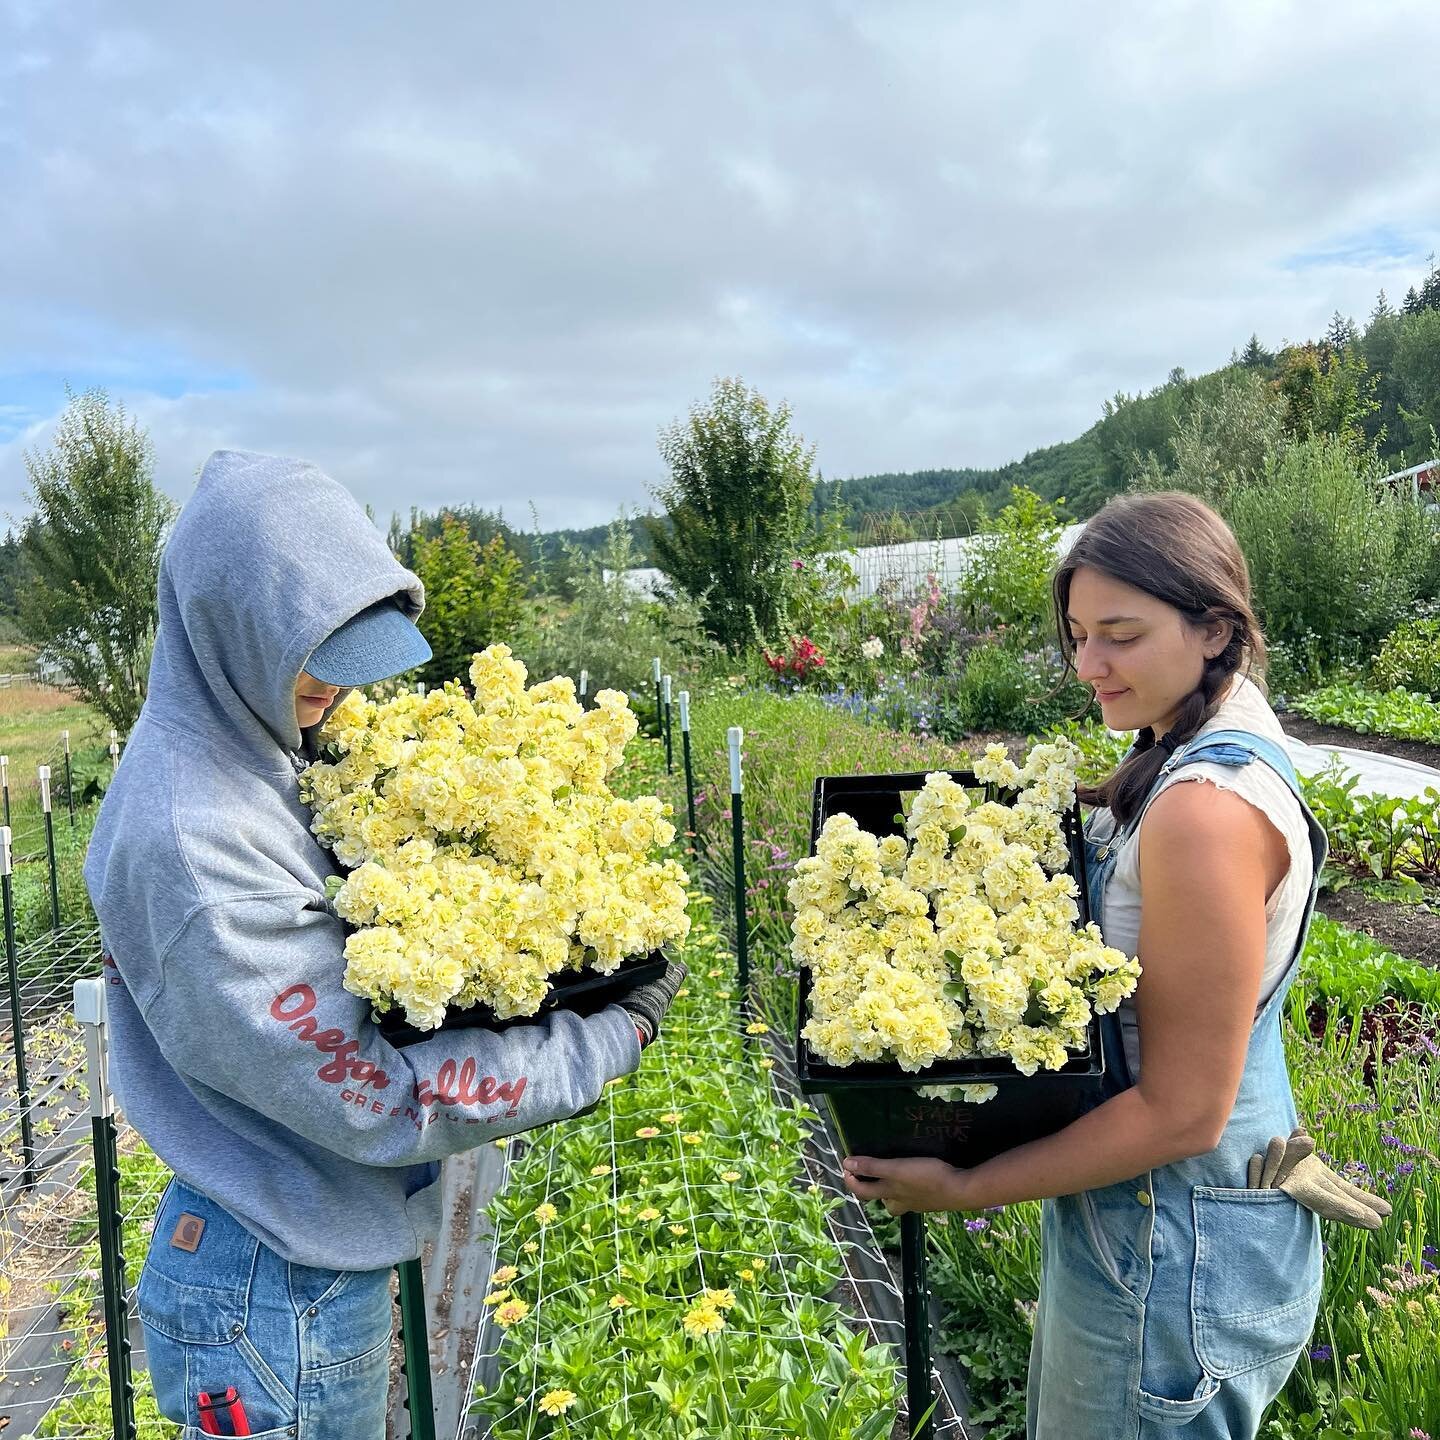 Jules @spacetwinsprovisions with Yasmin @yasmin___ahmad harvesting stock the other day for @seattlewholesalegrowersmarket 🌼. We have a full service wedding coming up this weekend and lots of bulk bucket orders coming up too! Definitely feeling the e